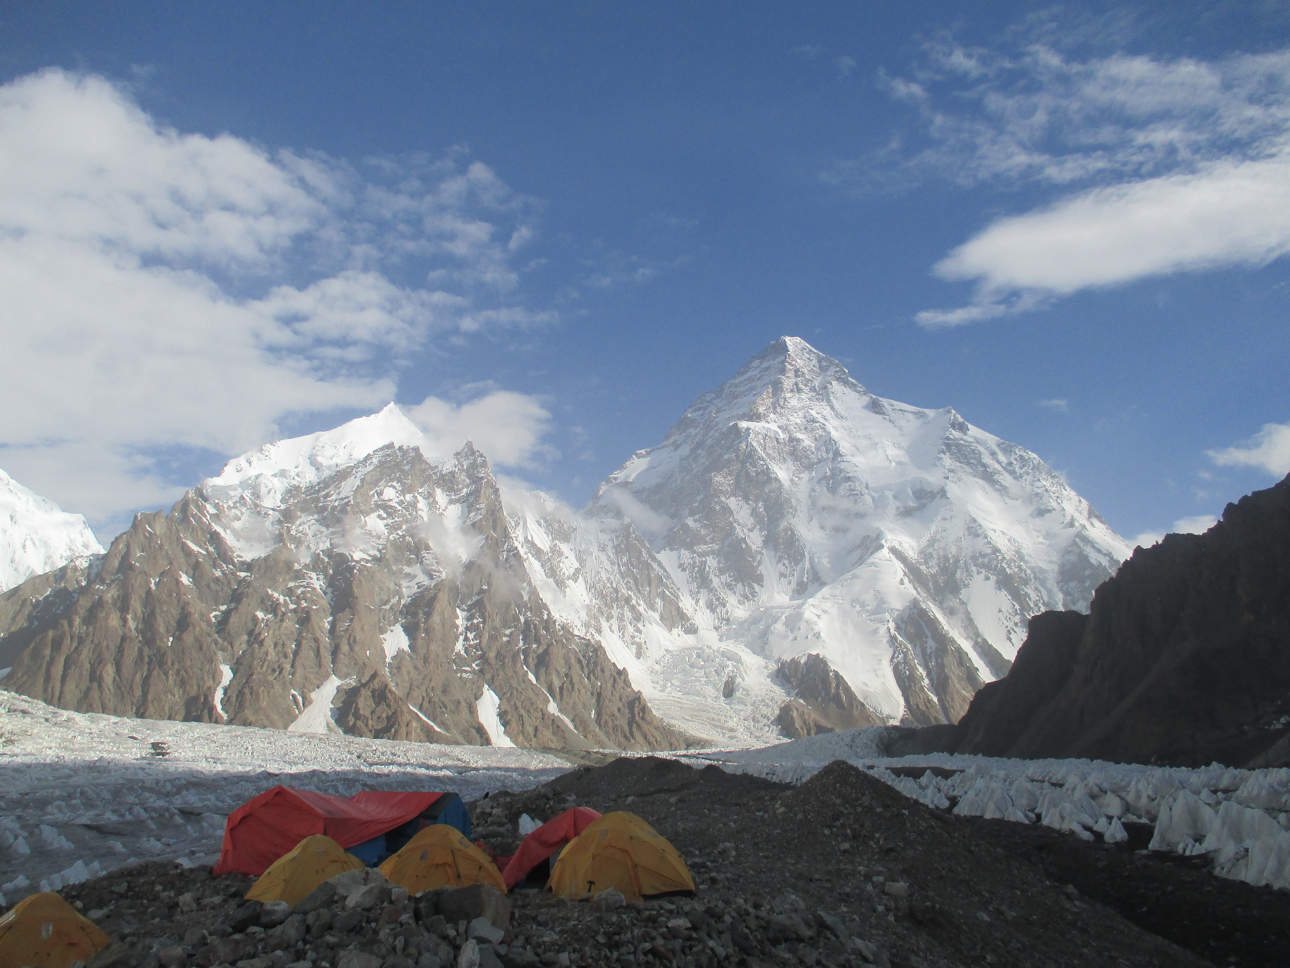  To the left of &nbsp;K2, was a bewildering mass of &nbsp;peaks and  glaciers &nbsp;whose existence &nbsp;I had &nbsp;not suspected. &nbsp;Sitting  alone gazing at the &nbsp;cirque forming the head of &nbsp;the  K2, glacier was an experience I shall 